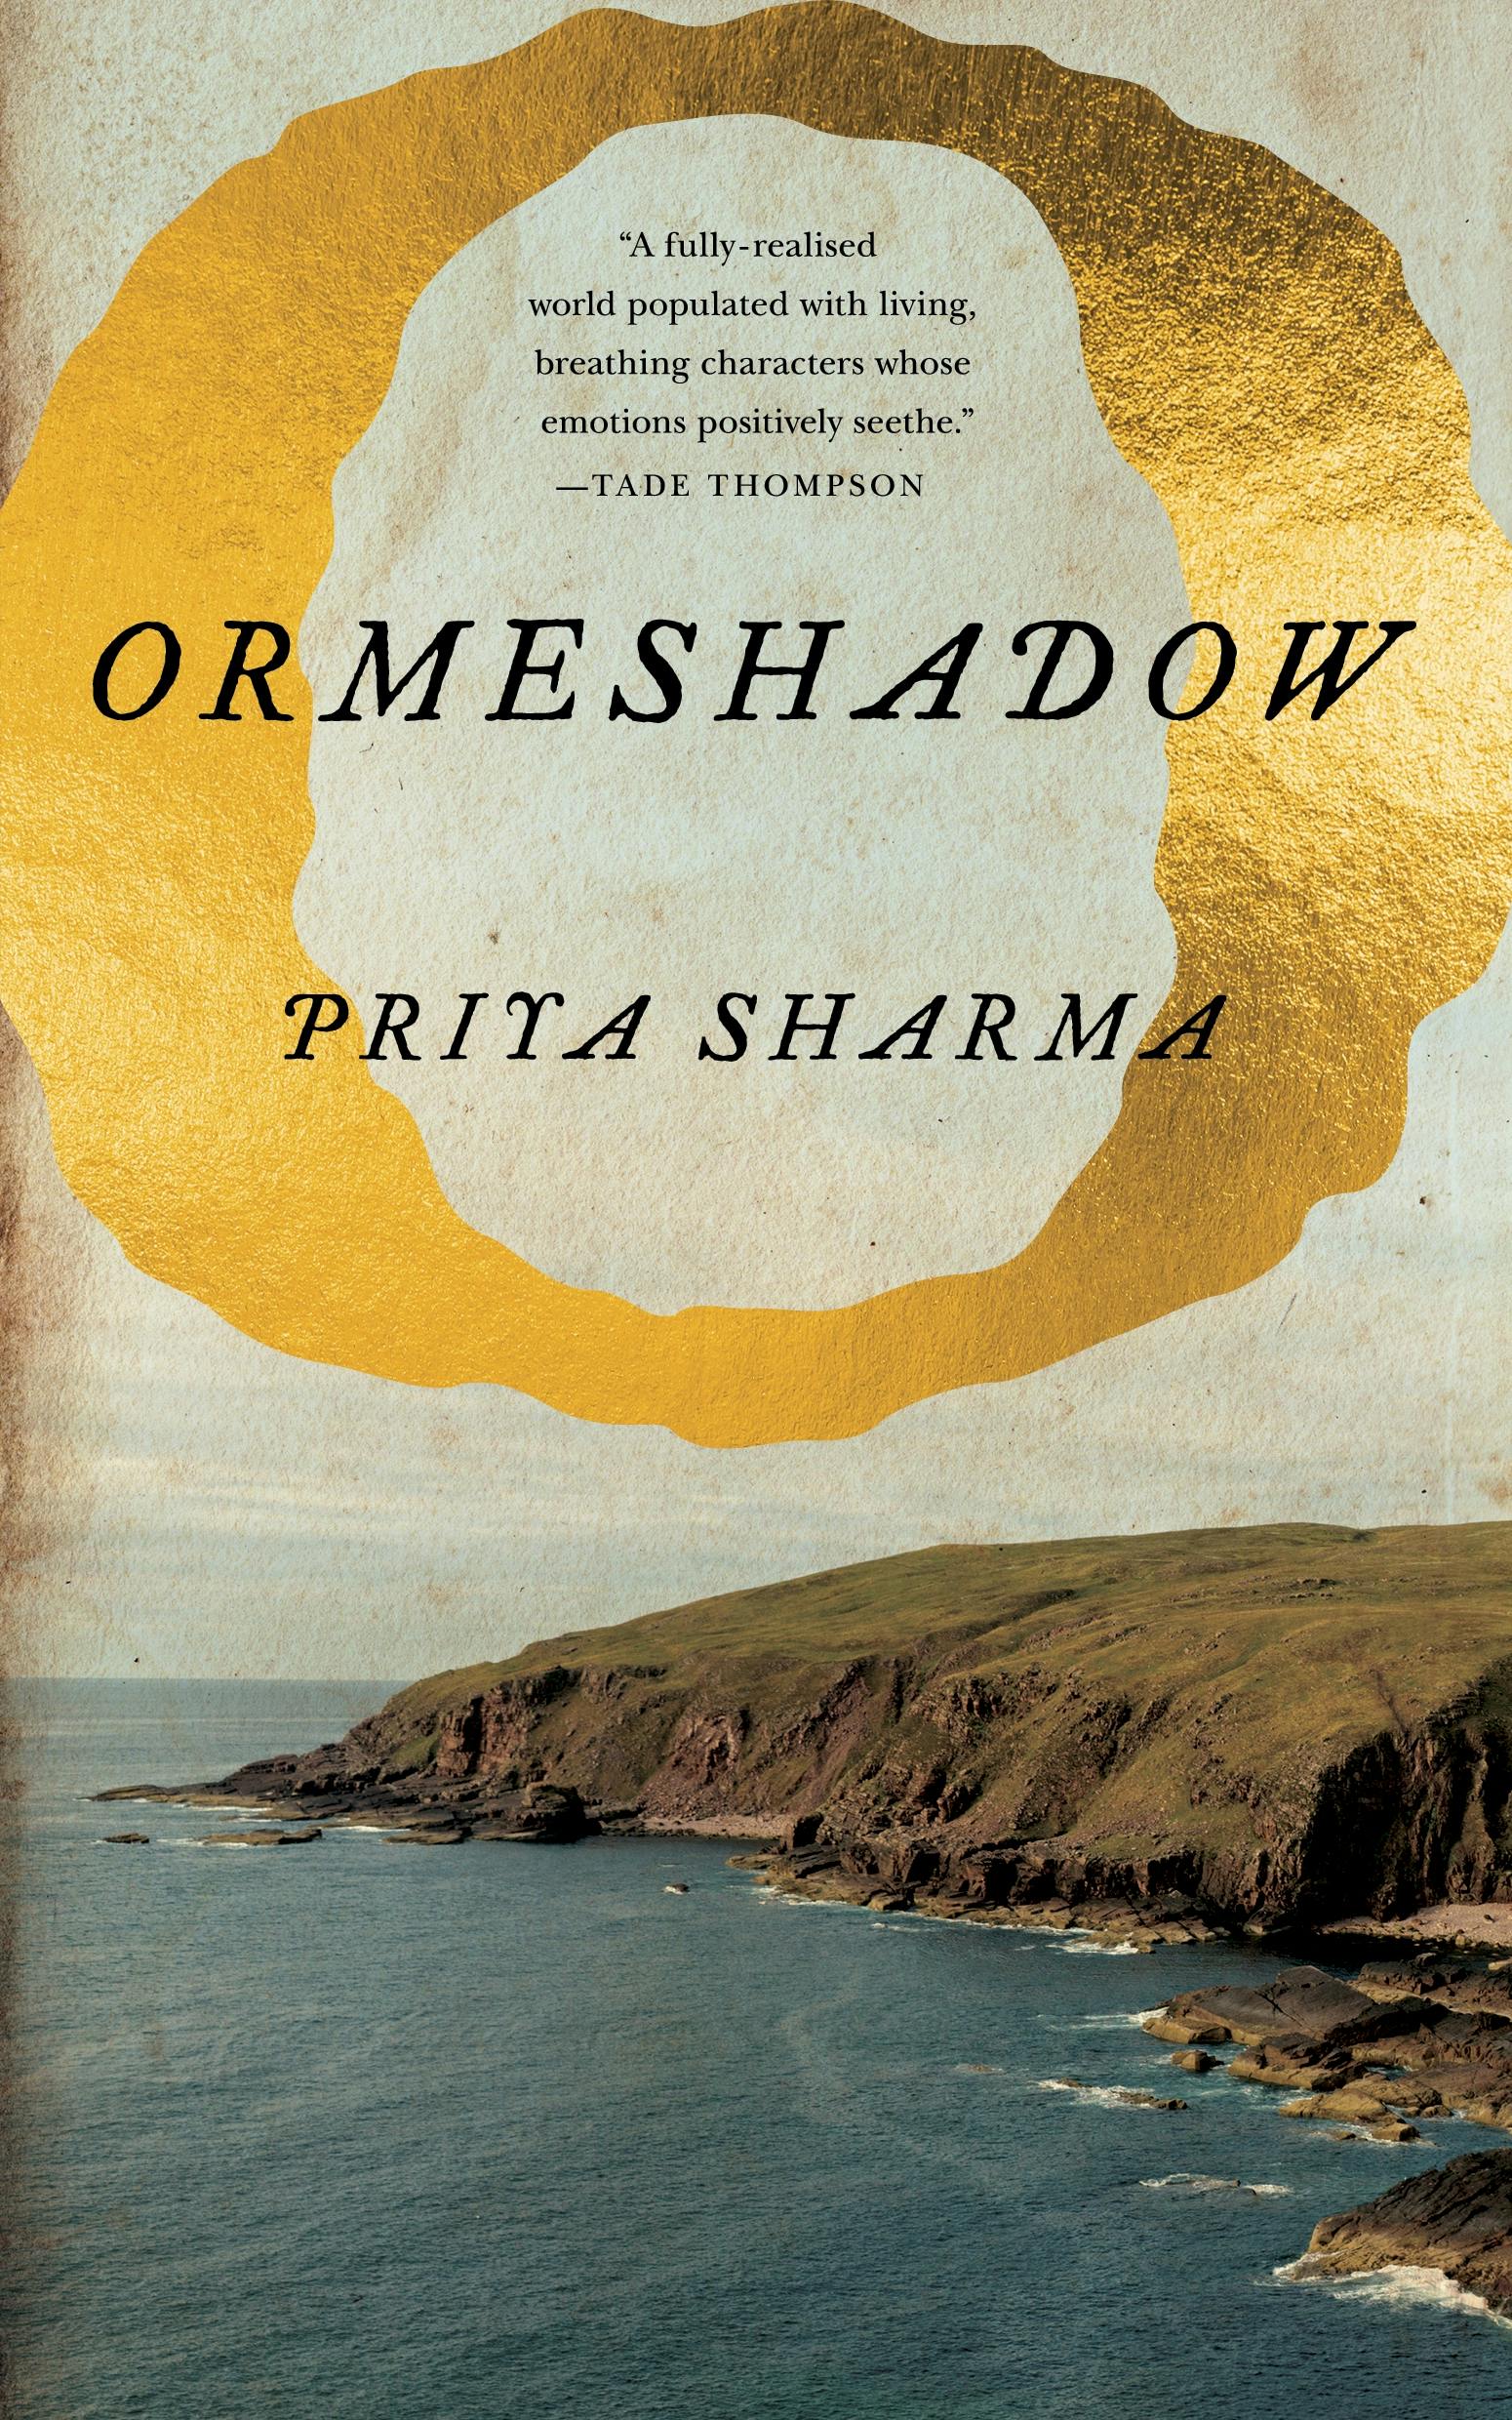 Cover for the book titled as: Ormeshadow